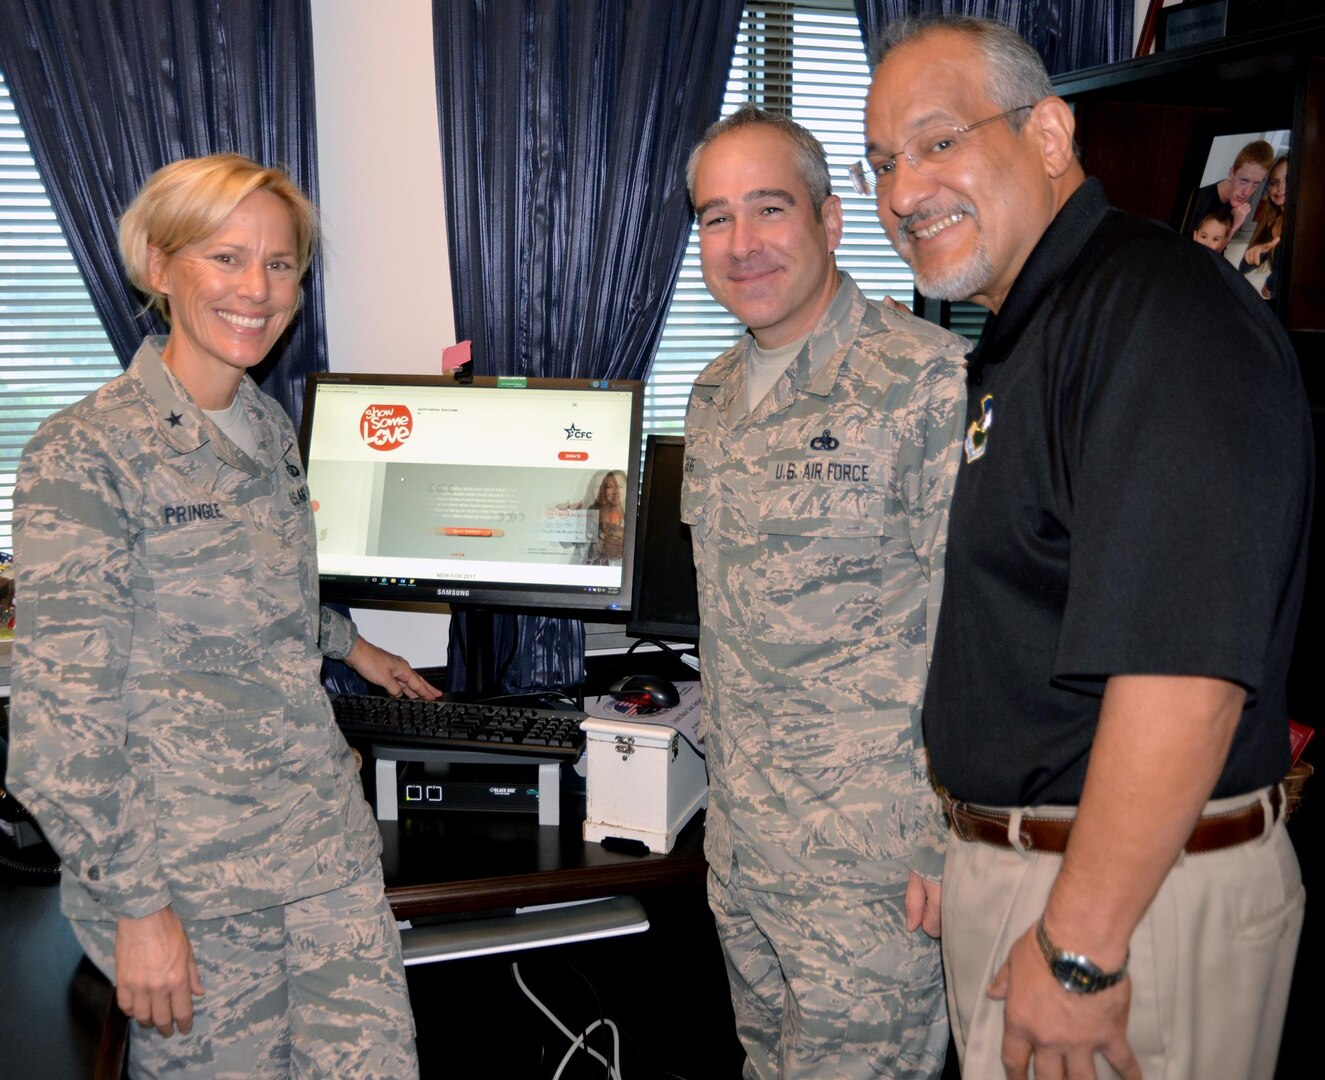 (From left) Brig. Gen. Heather Pringle, commander, 502nd Air Base Wing and Joint Base San Antonio; Chief Master Sgt. Kristopher Berg, command chief, 502nd ABW and JBSA; and Fil Jimenez, 502nd ABW technical director; look over the 2017 Combined Federal Campaign website at http://opm.gov/showsomelovecfc at the 502nd ABW headquarters at JBSA-Fort Sam Houston recently.